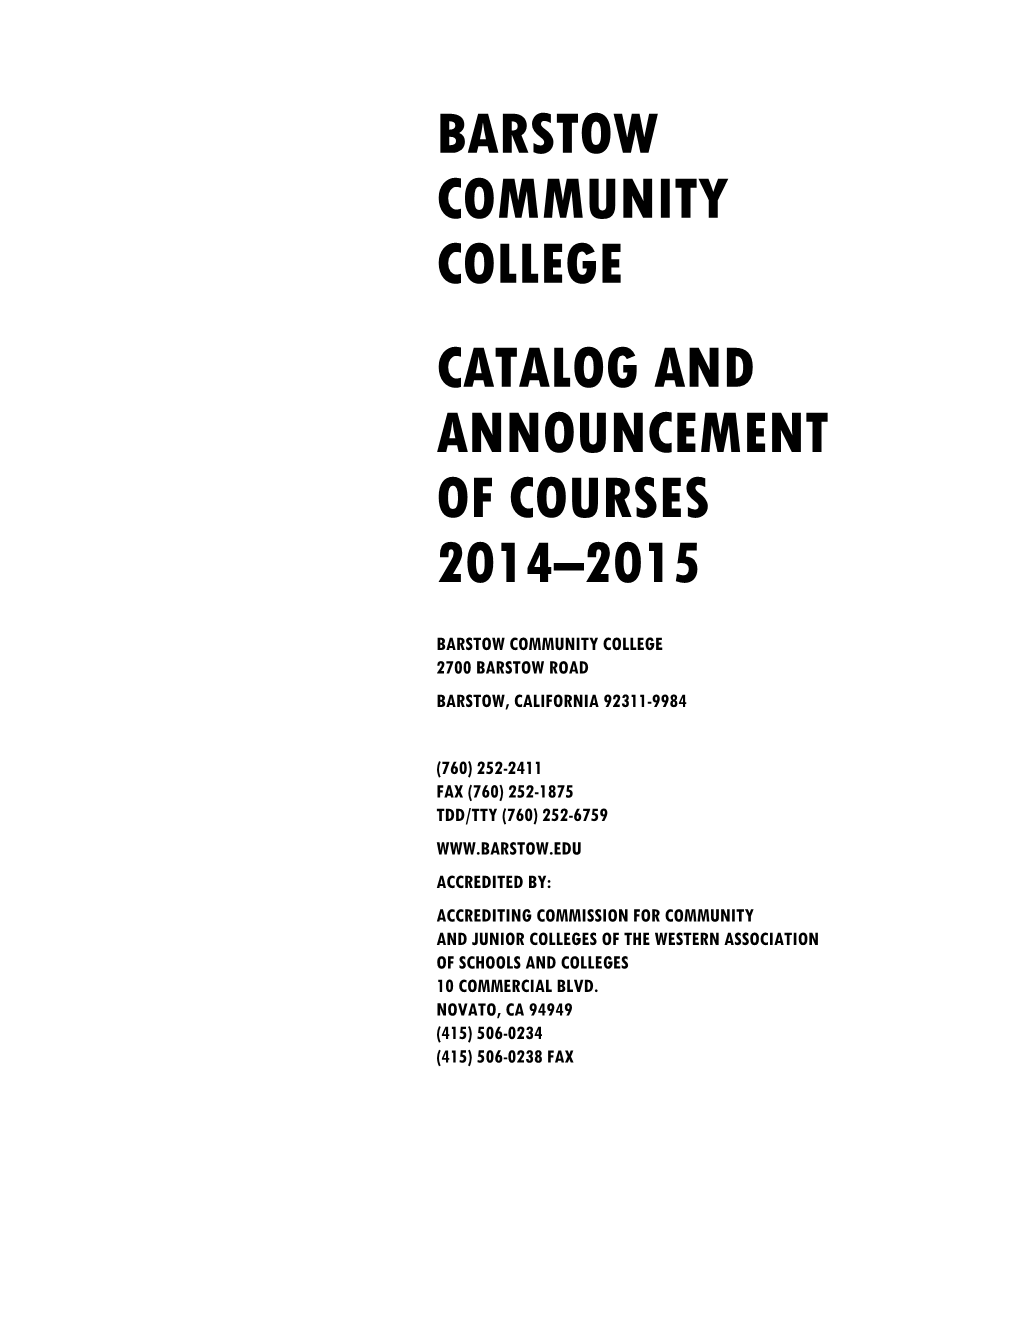 Barstow Community College Catalog and Announcement of Courses